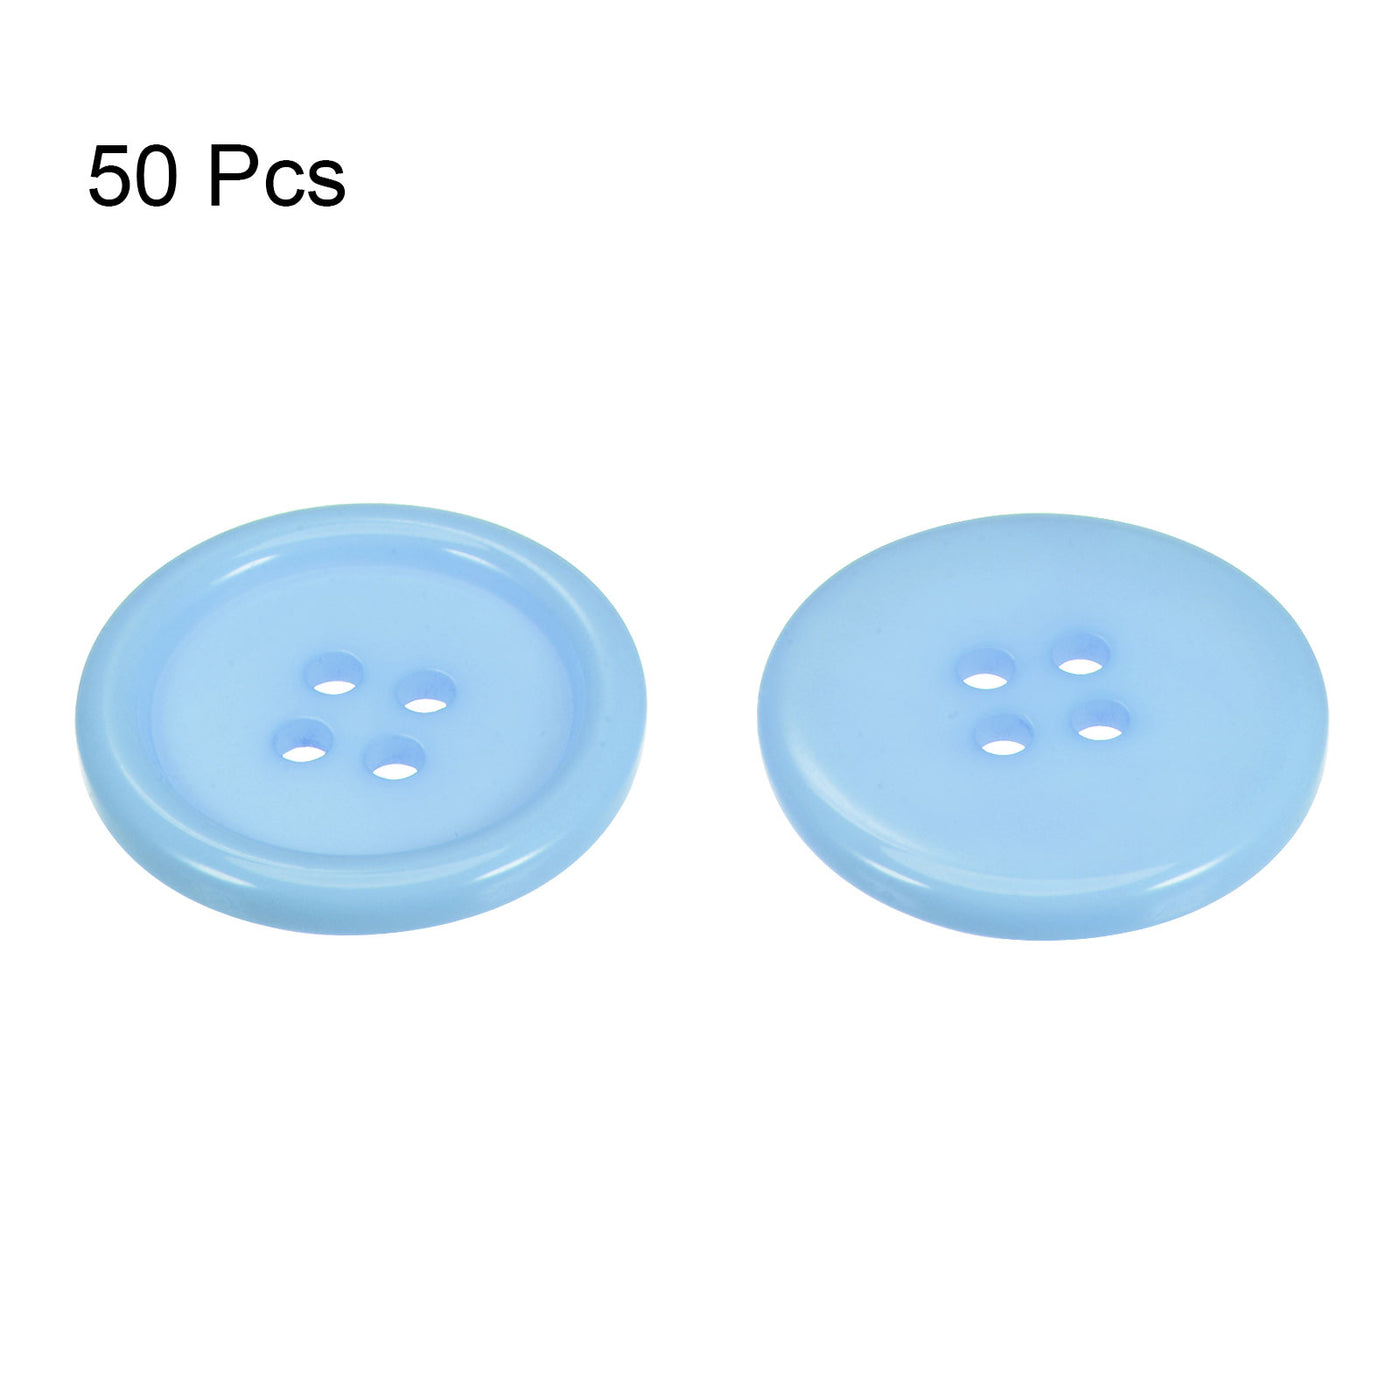 Harfington 50pcs 40L Sewing Buttons 1" Resin Round Flat 4-Hole Craft Buttons, Light Blue